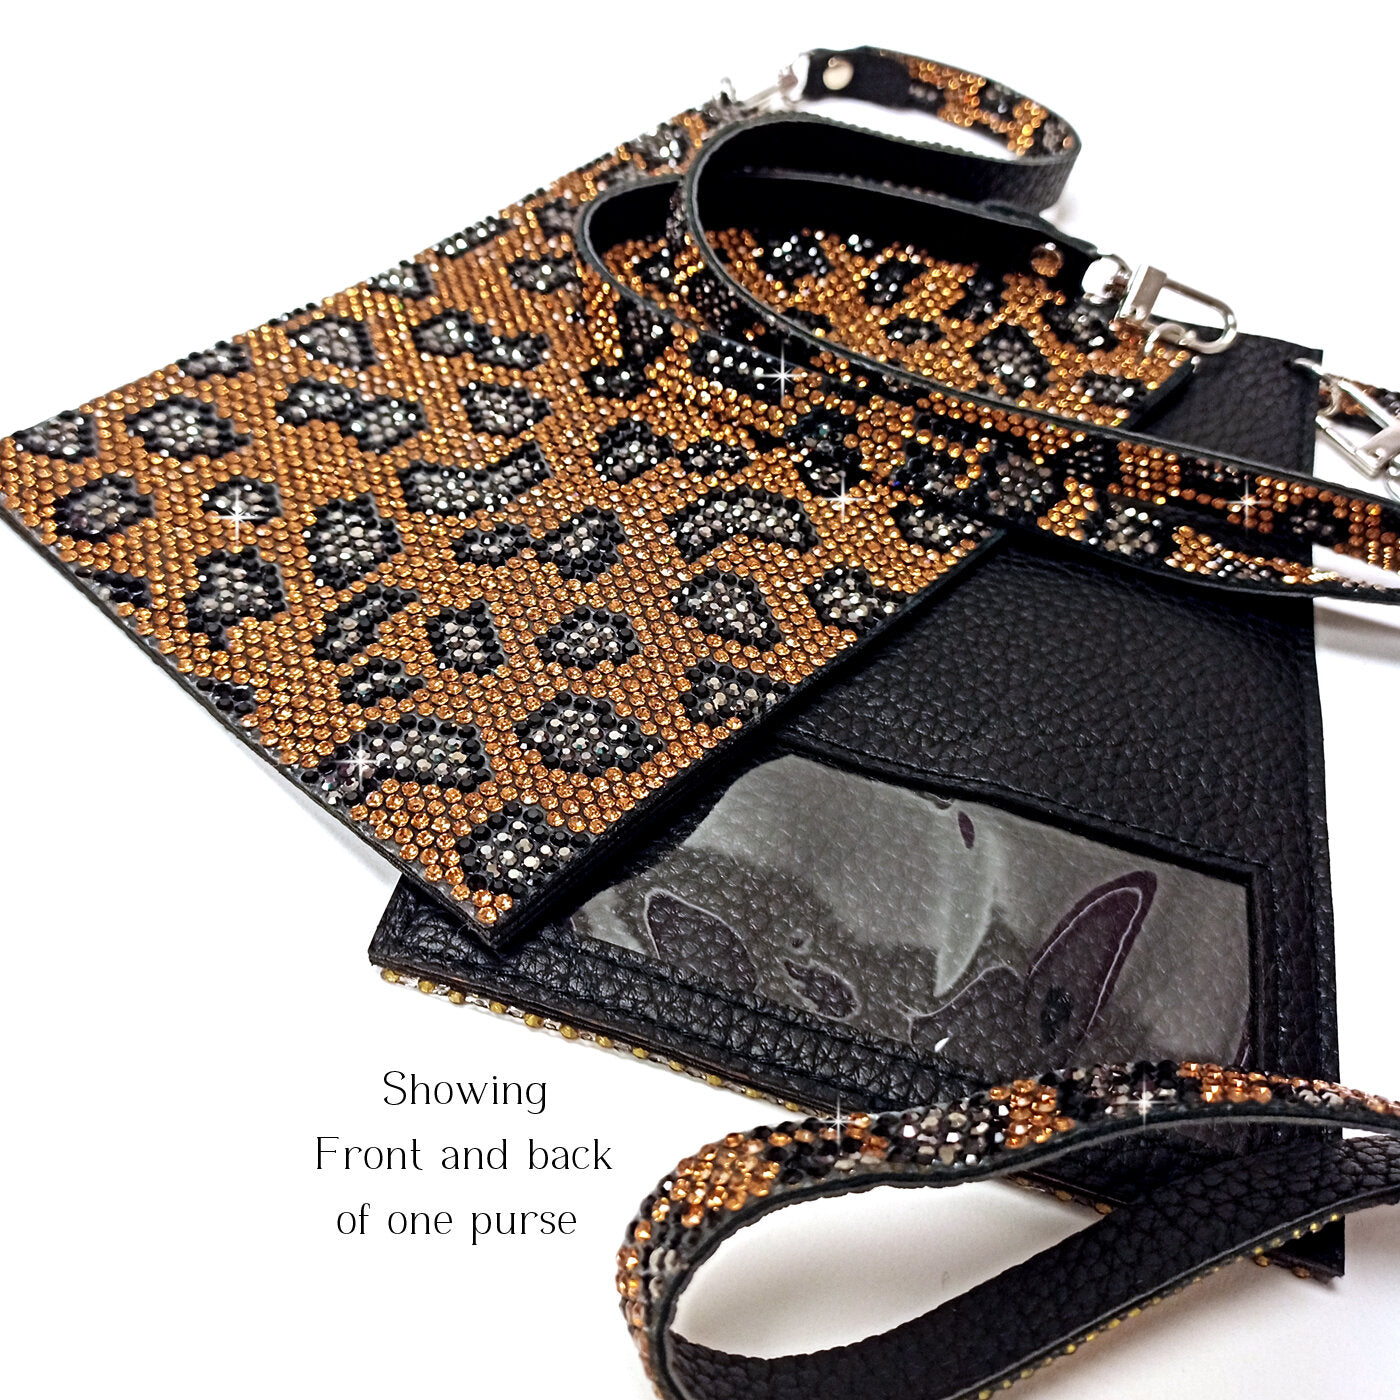 BUBBLES AND BLING CELLPHONE PURSE WITH DIAMONDS